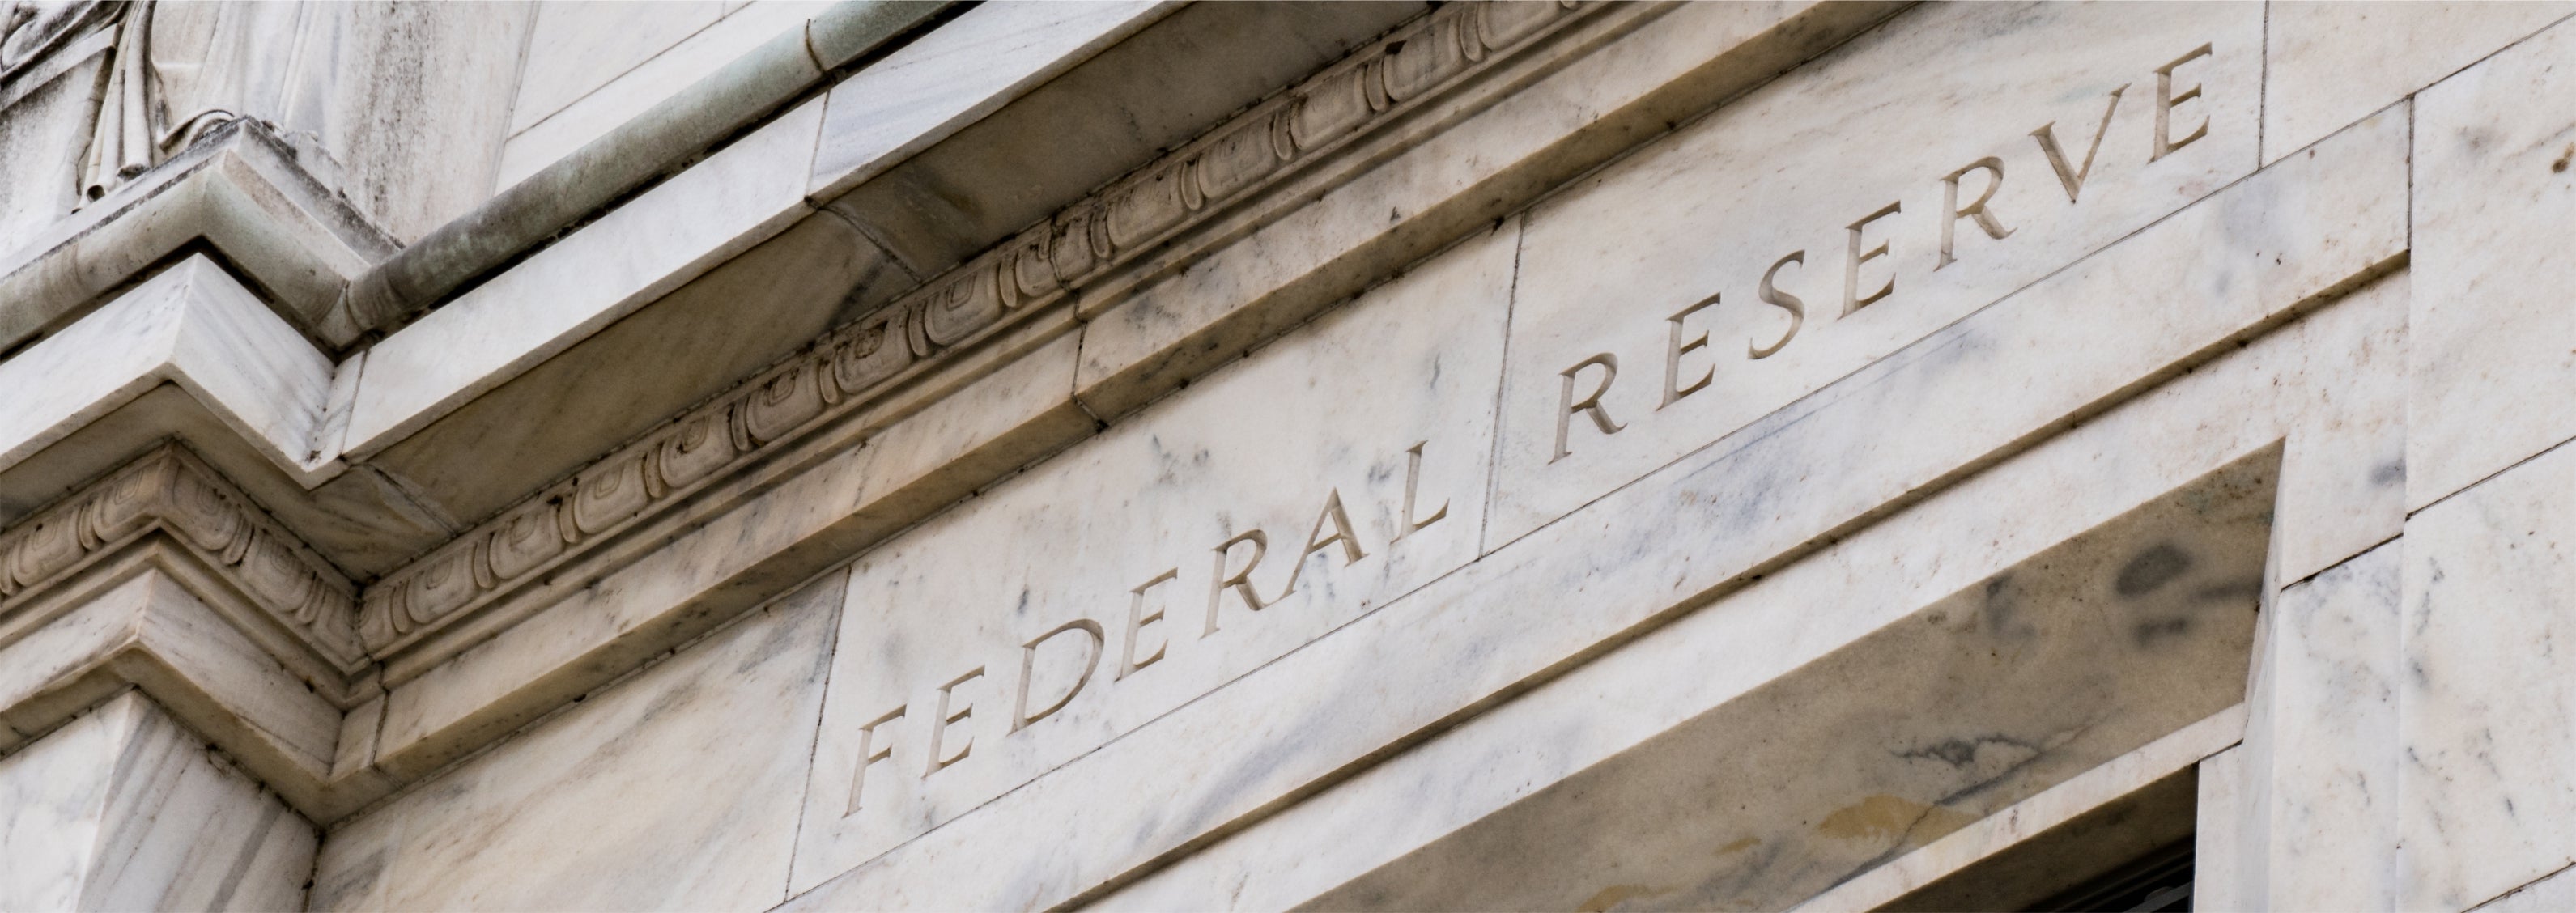 PART 2:  HOW THE FEDERAL RESERVE SYSTEM OPERATES AND WHY IT HAS FAILED